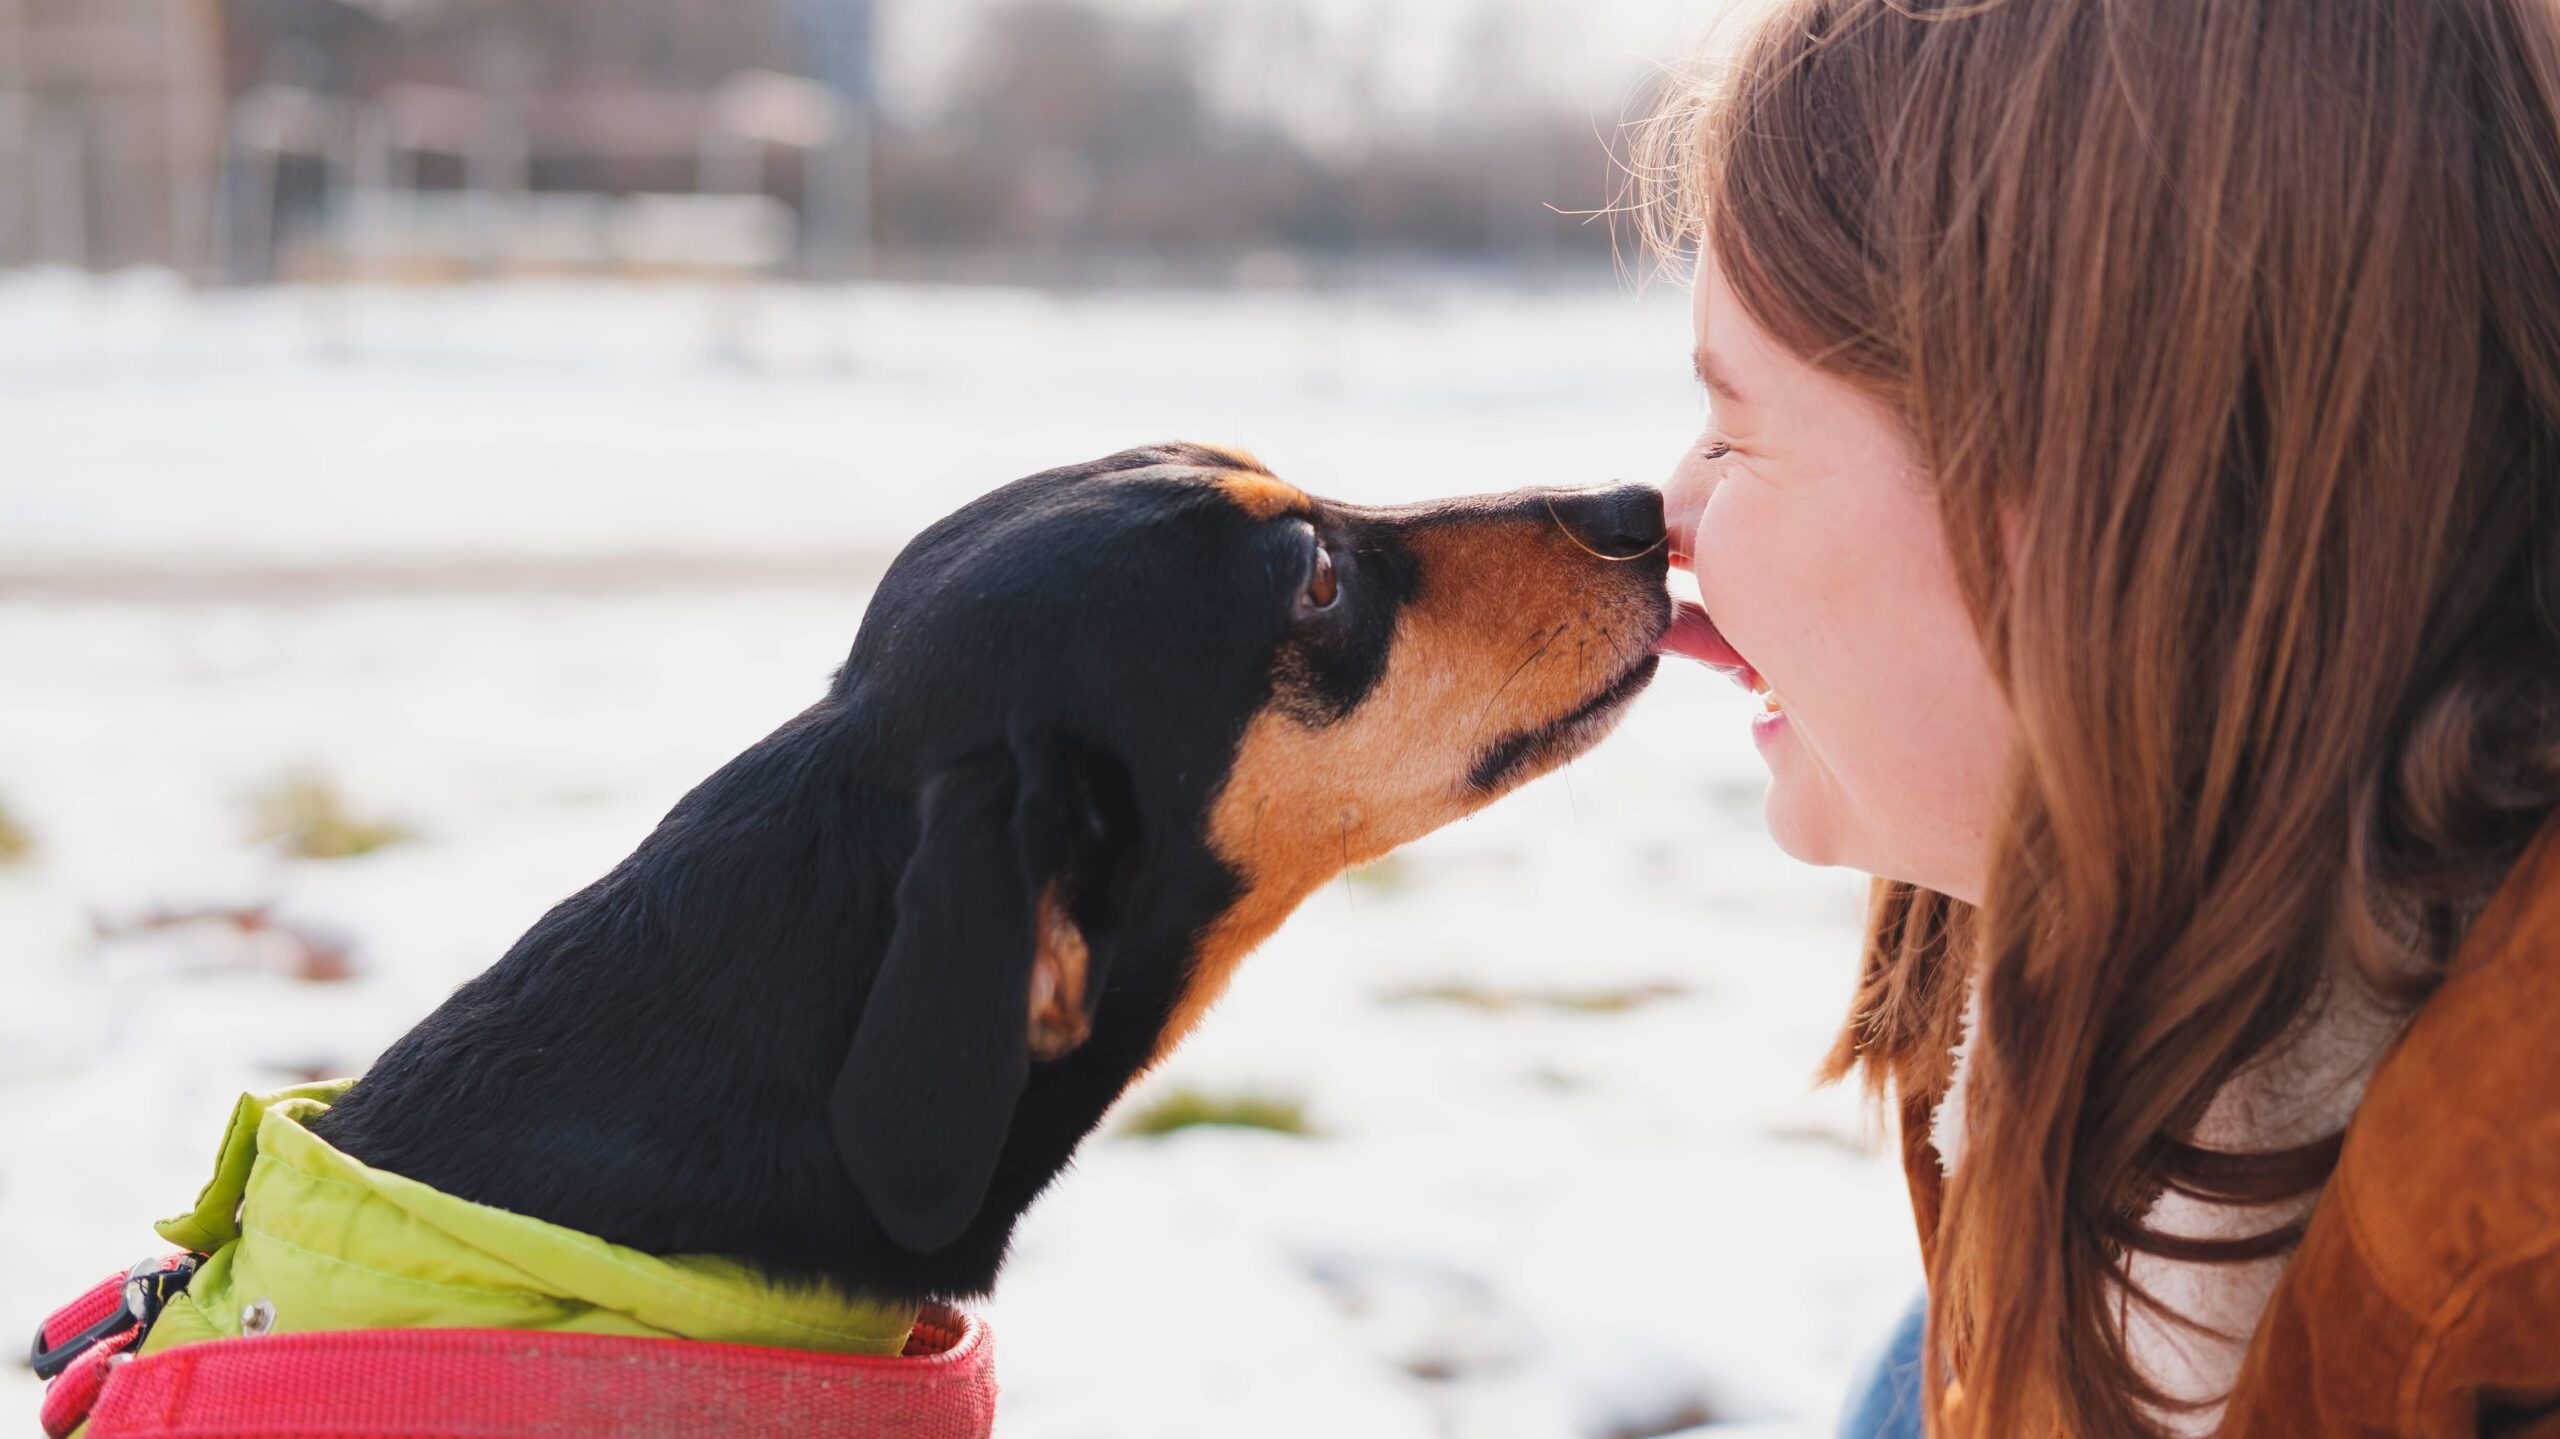 Lovely dachshund kissing her owner at a walk. Being happy with pets: dog licking a smiling young woman in the park